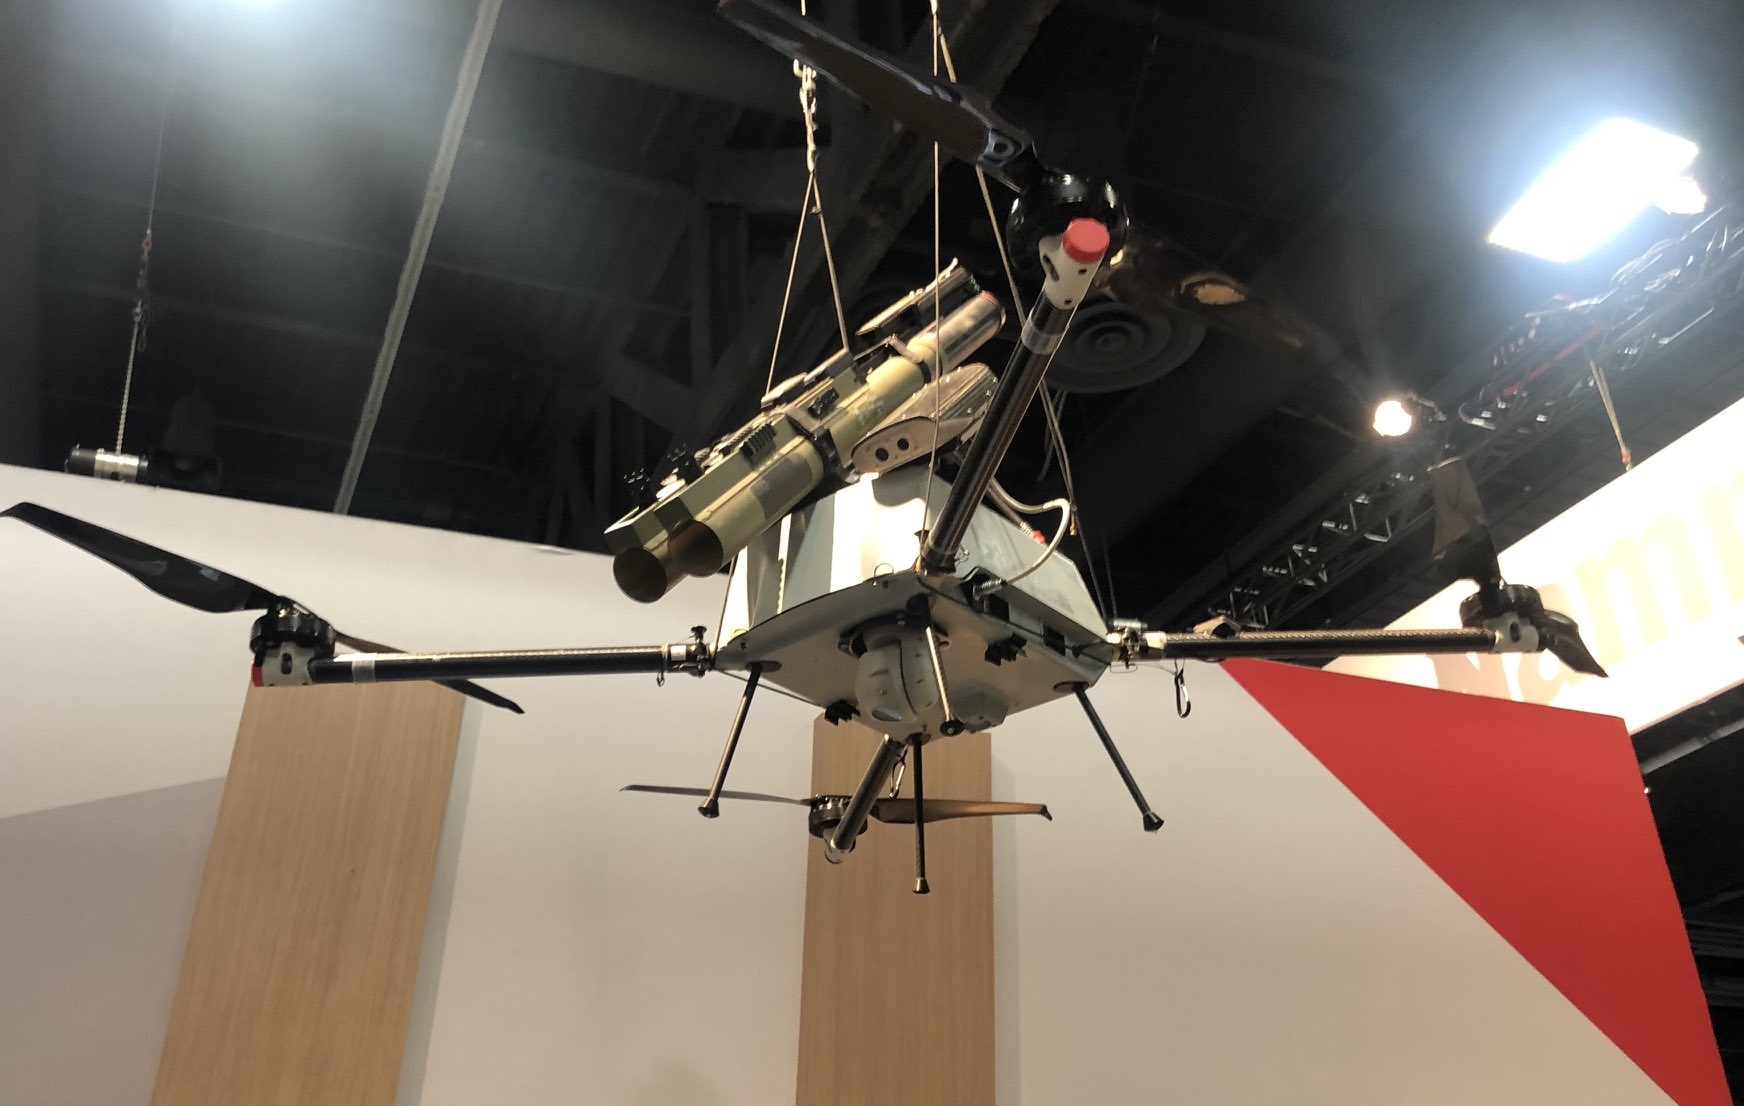 Alare Technologies introduced the BLADE-55 drone with two M72 LAW anti-tank grenade launchers